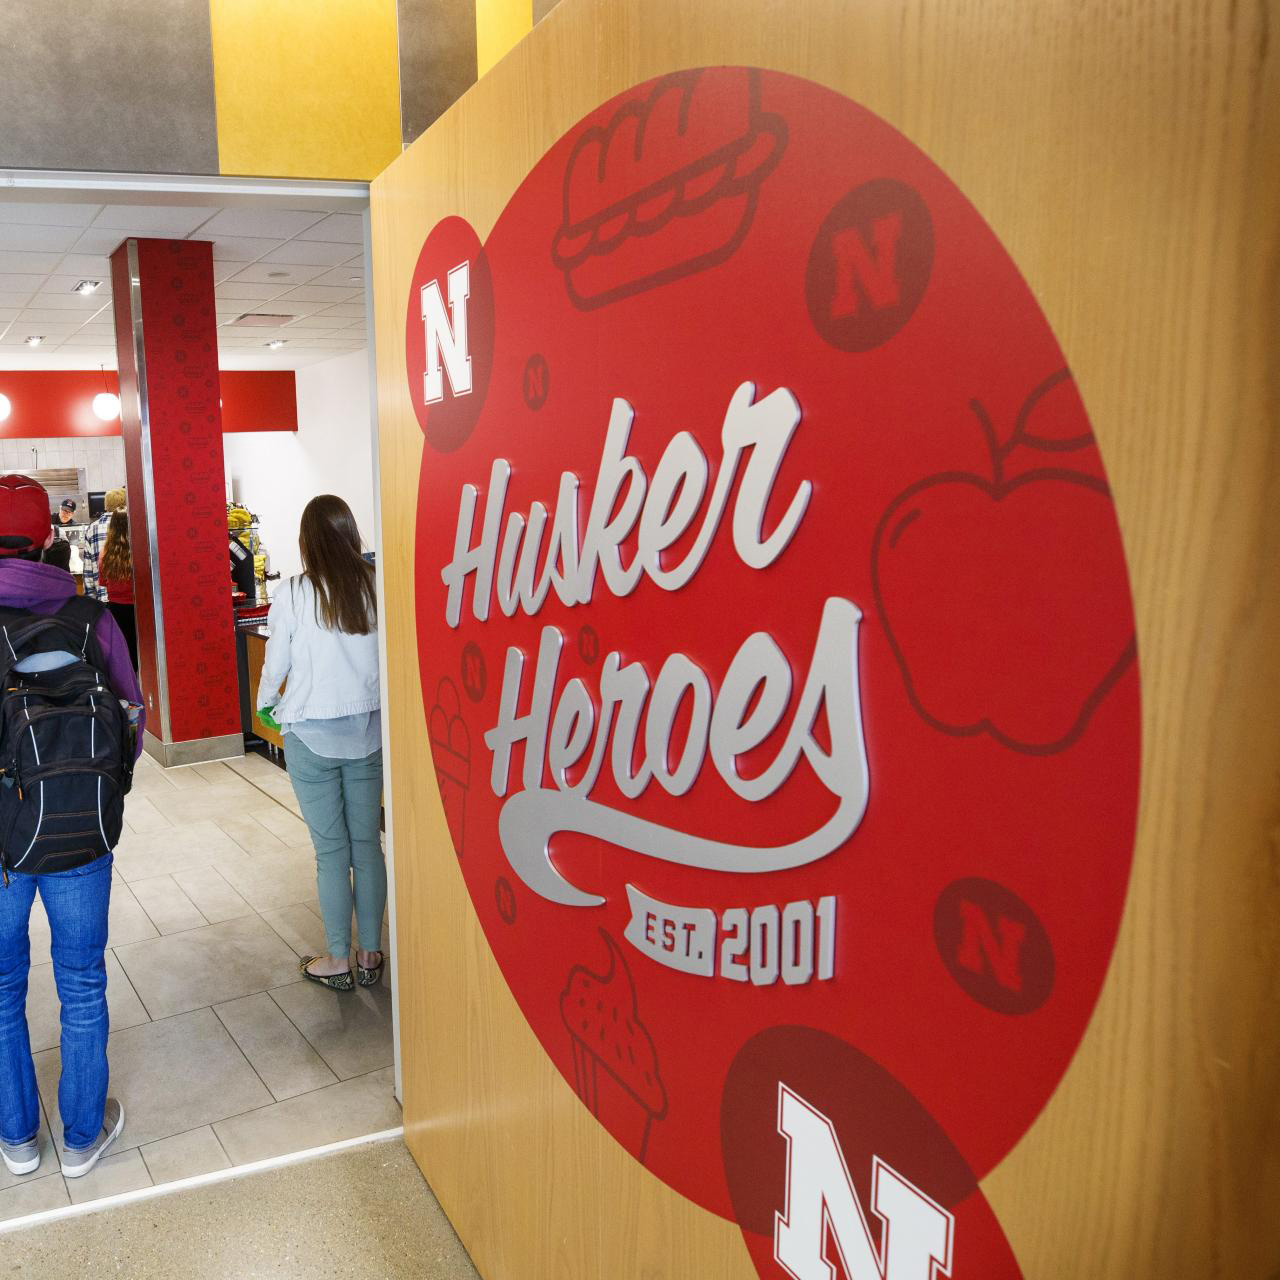 Husker Heroes sign outside Husker Heroes at Cather